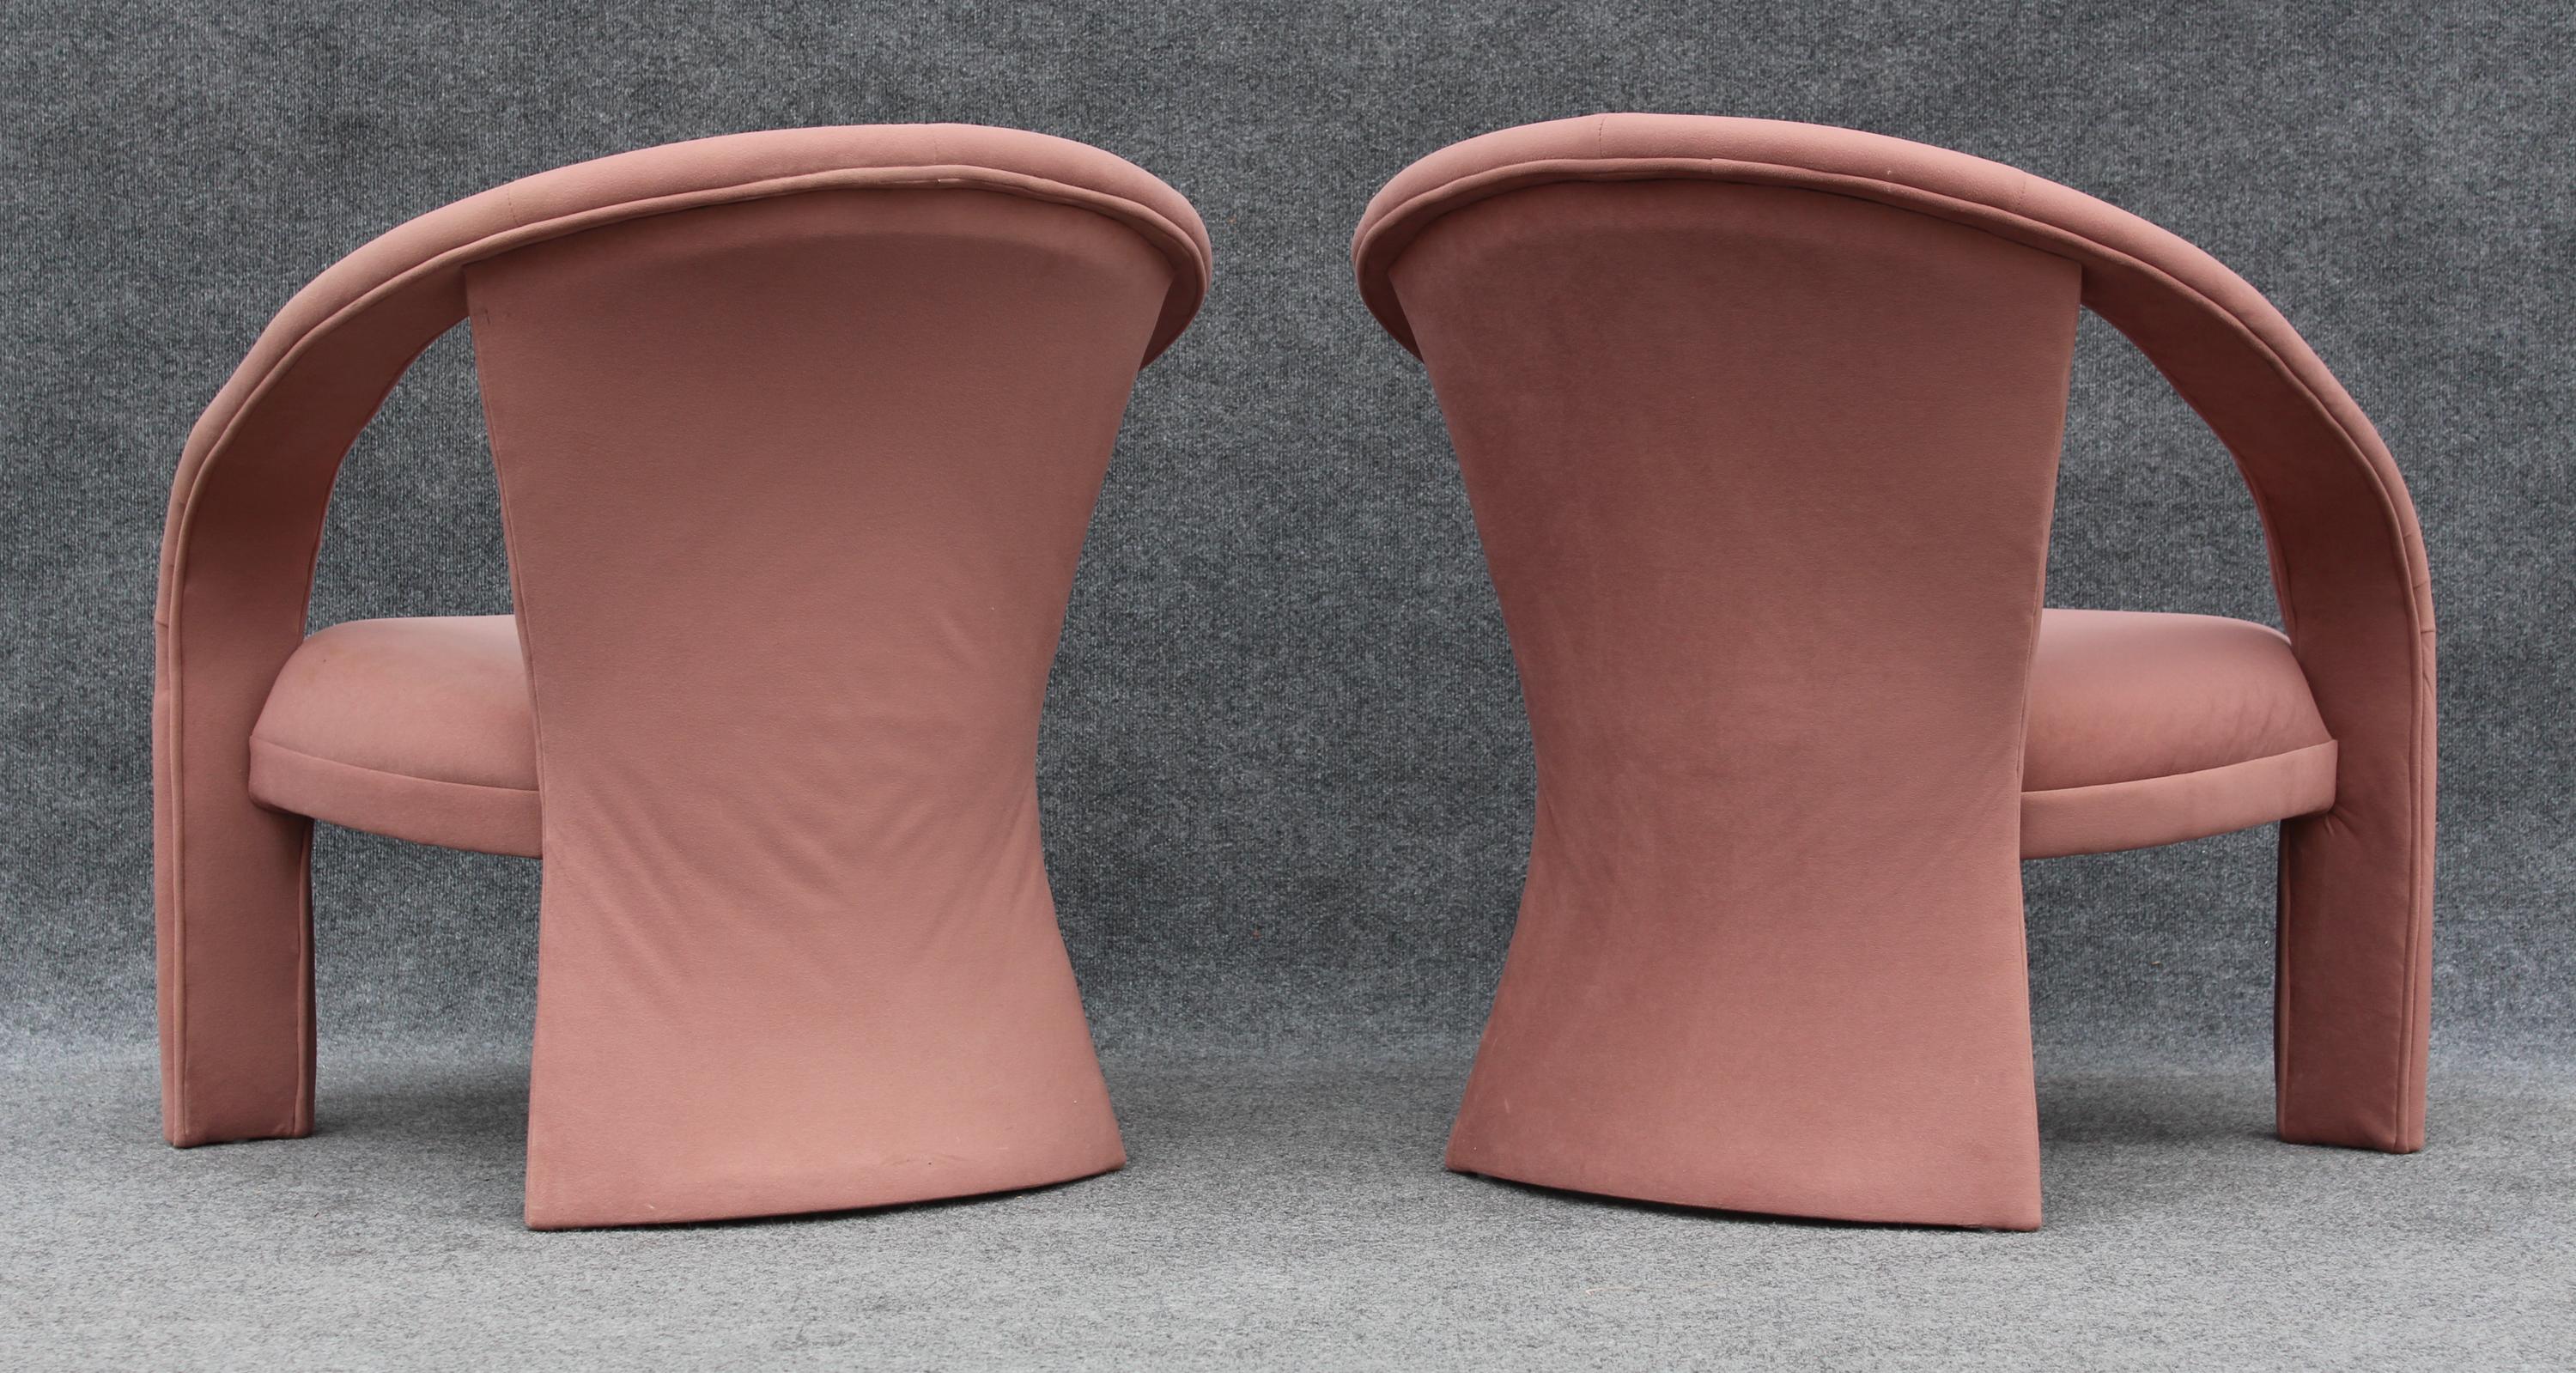 Pair of Pink Suede Sculptural Ribbon Armchairs or Lounge Chairs by Marge Carson For Sale 5